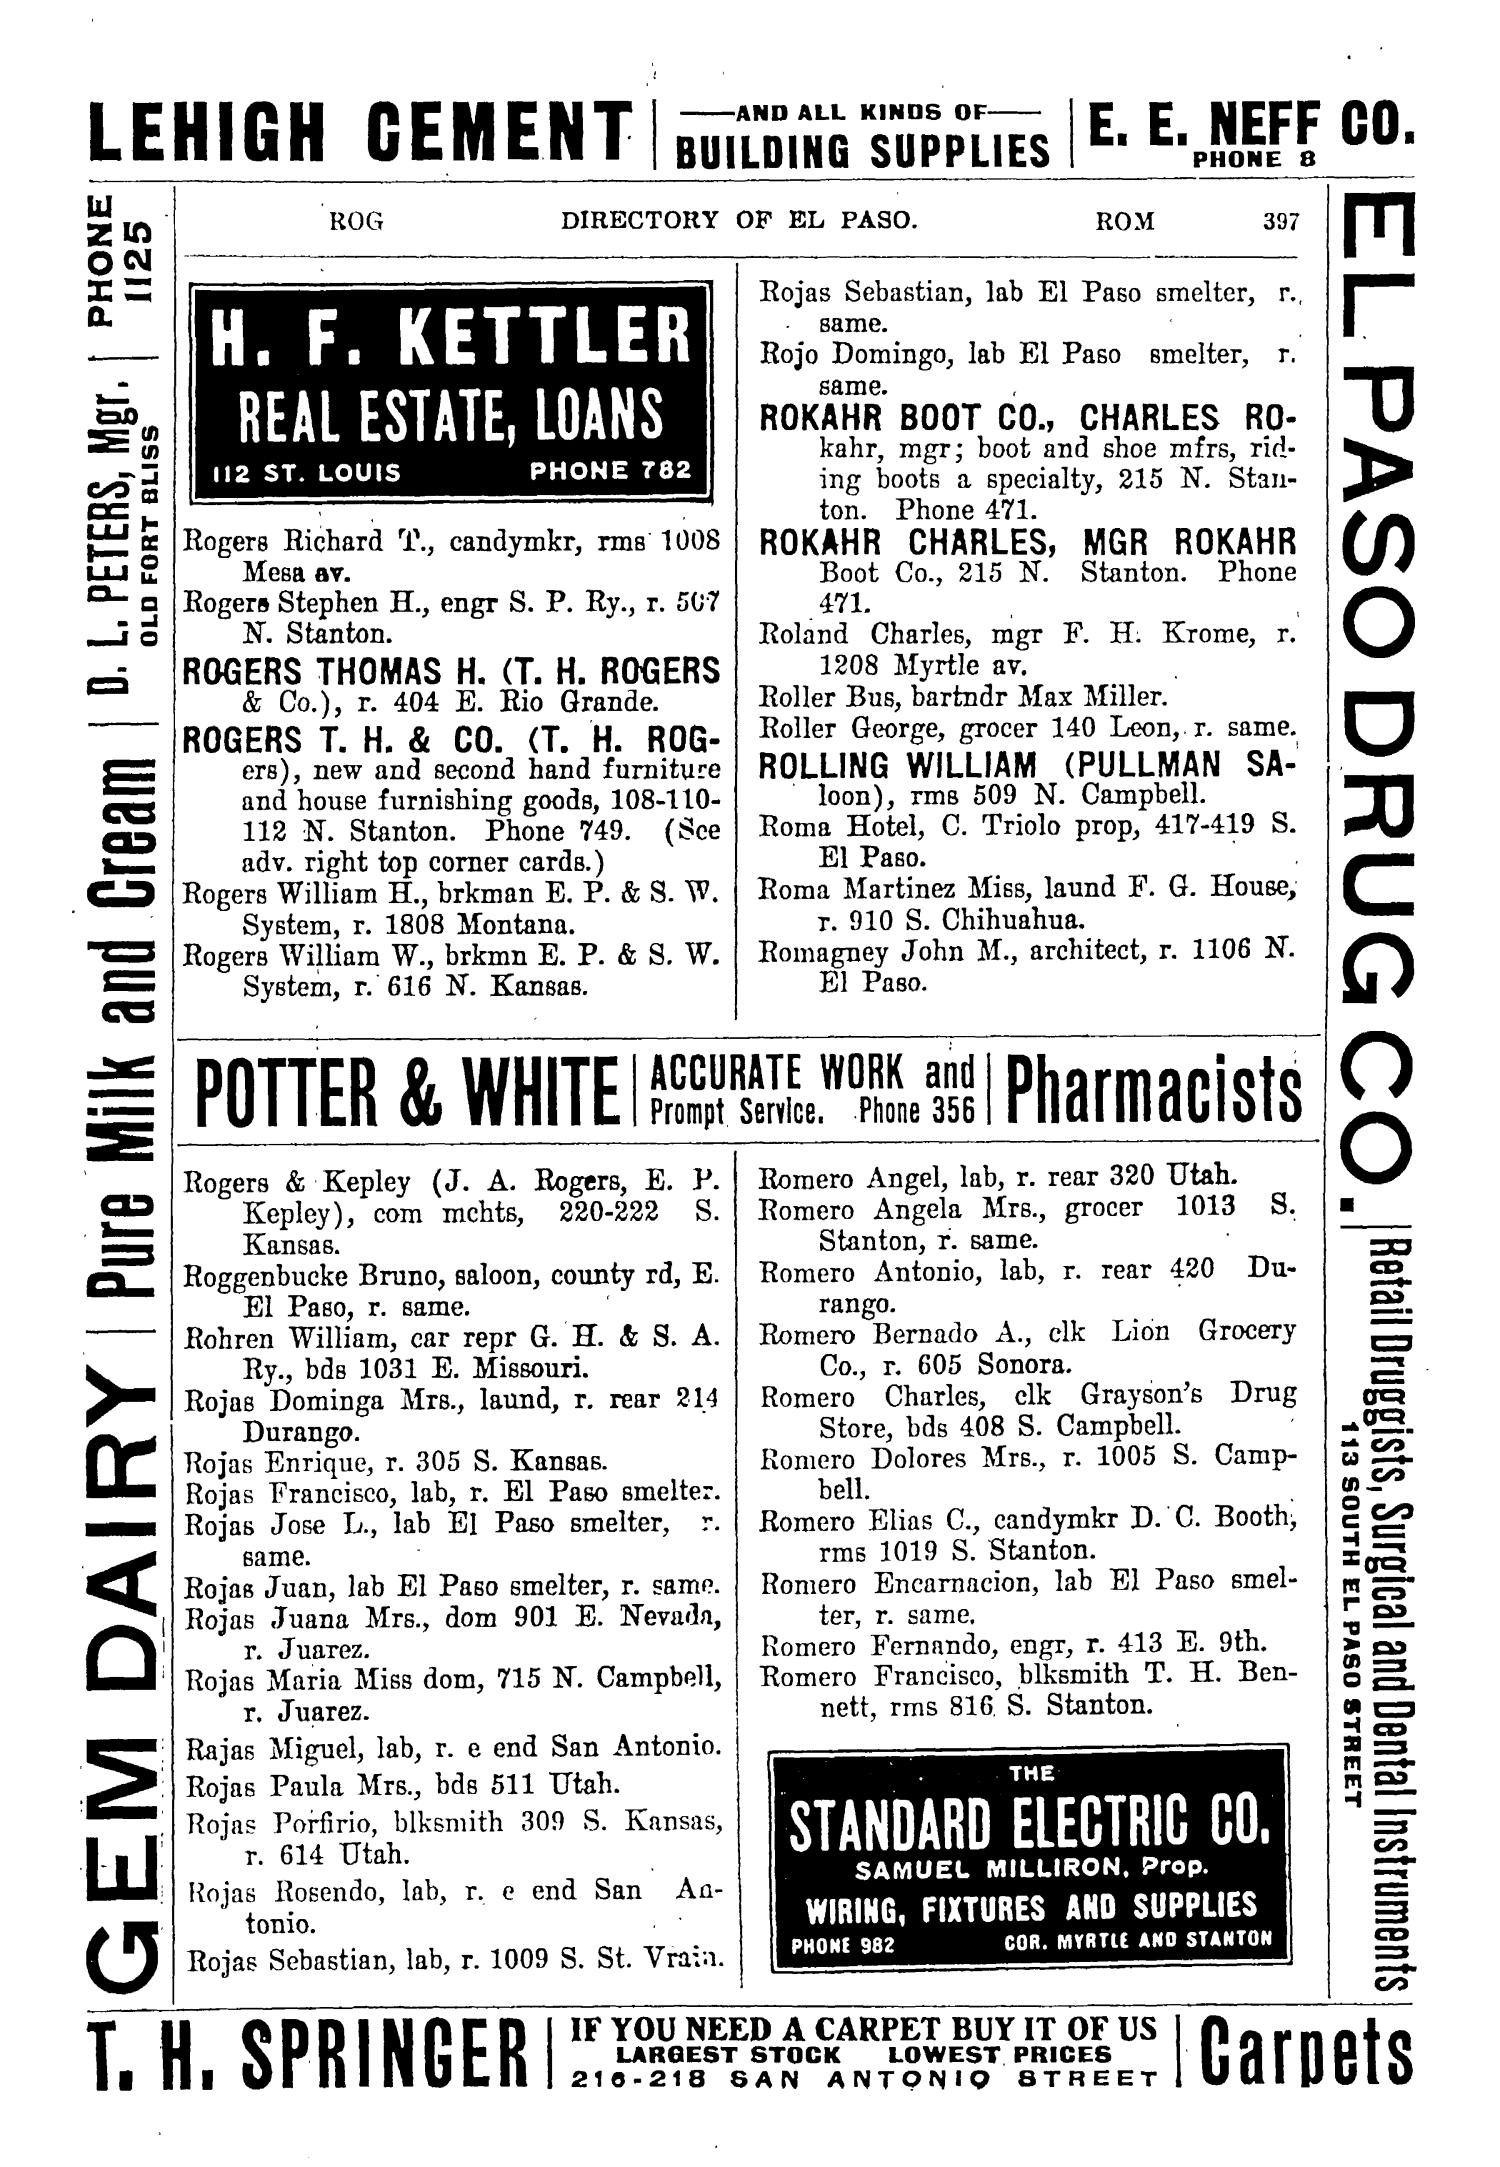 John F. Worley & Co.'s El Paso Directory for 1906
                                                
                                                    397
                                                